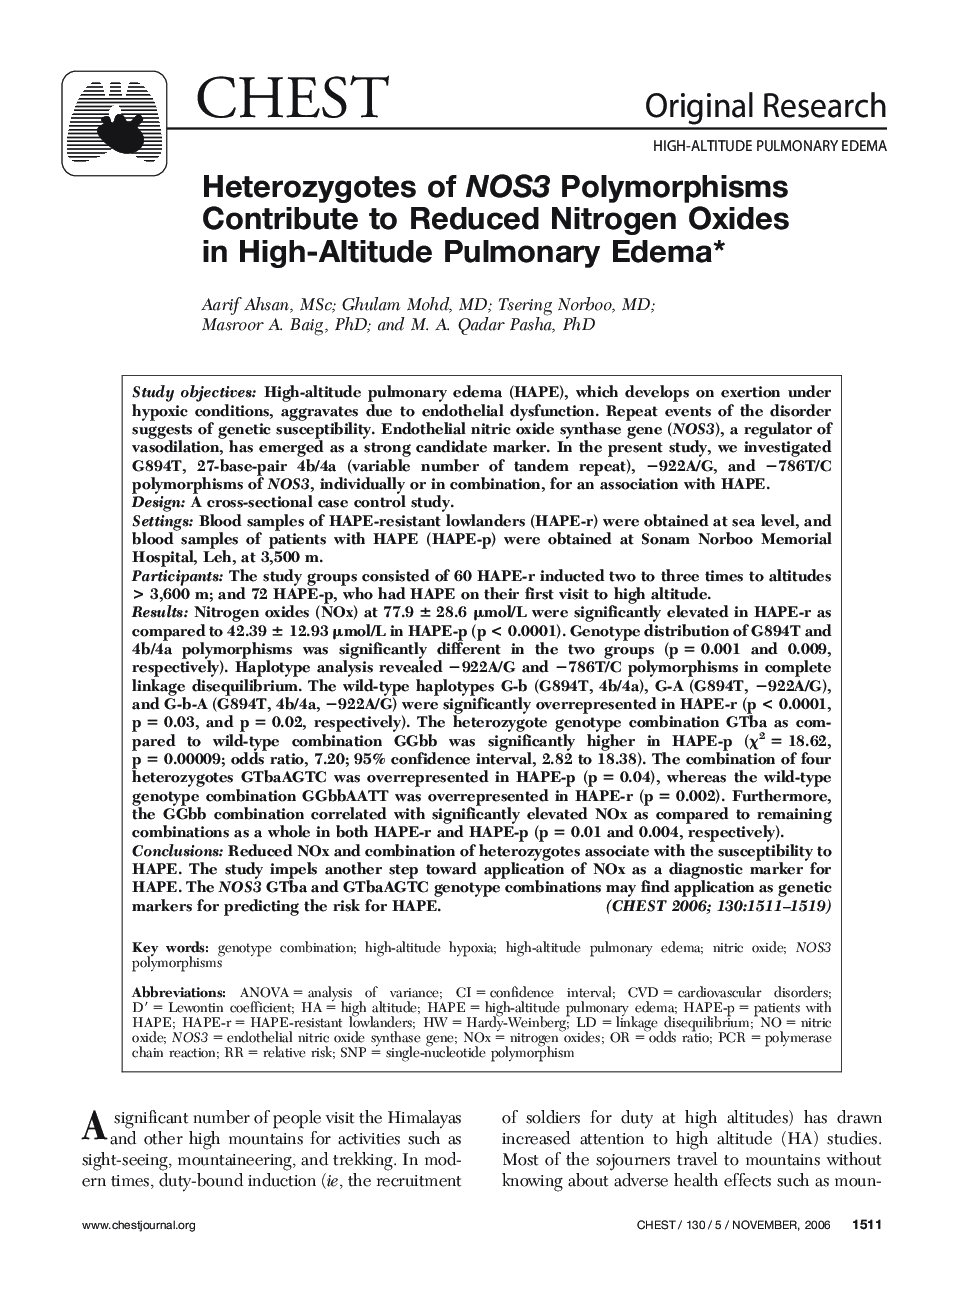 Heterozygotes of NOS3 Polymorphisms Contribute to Reduced Nitrogen Oxides in High-Altitude Pulmonary Edema 